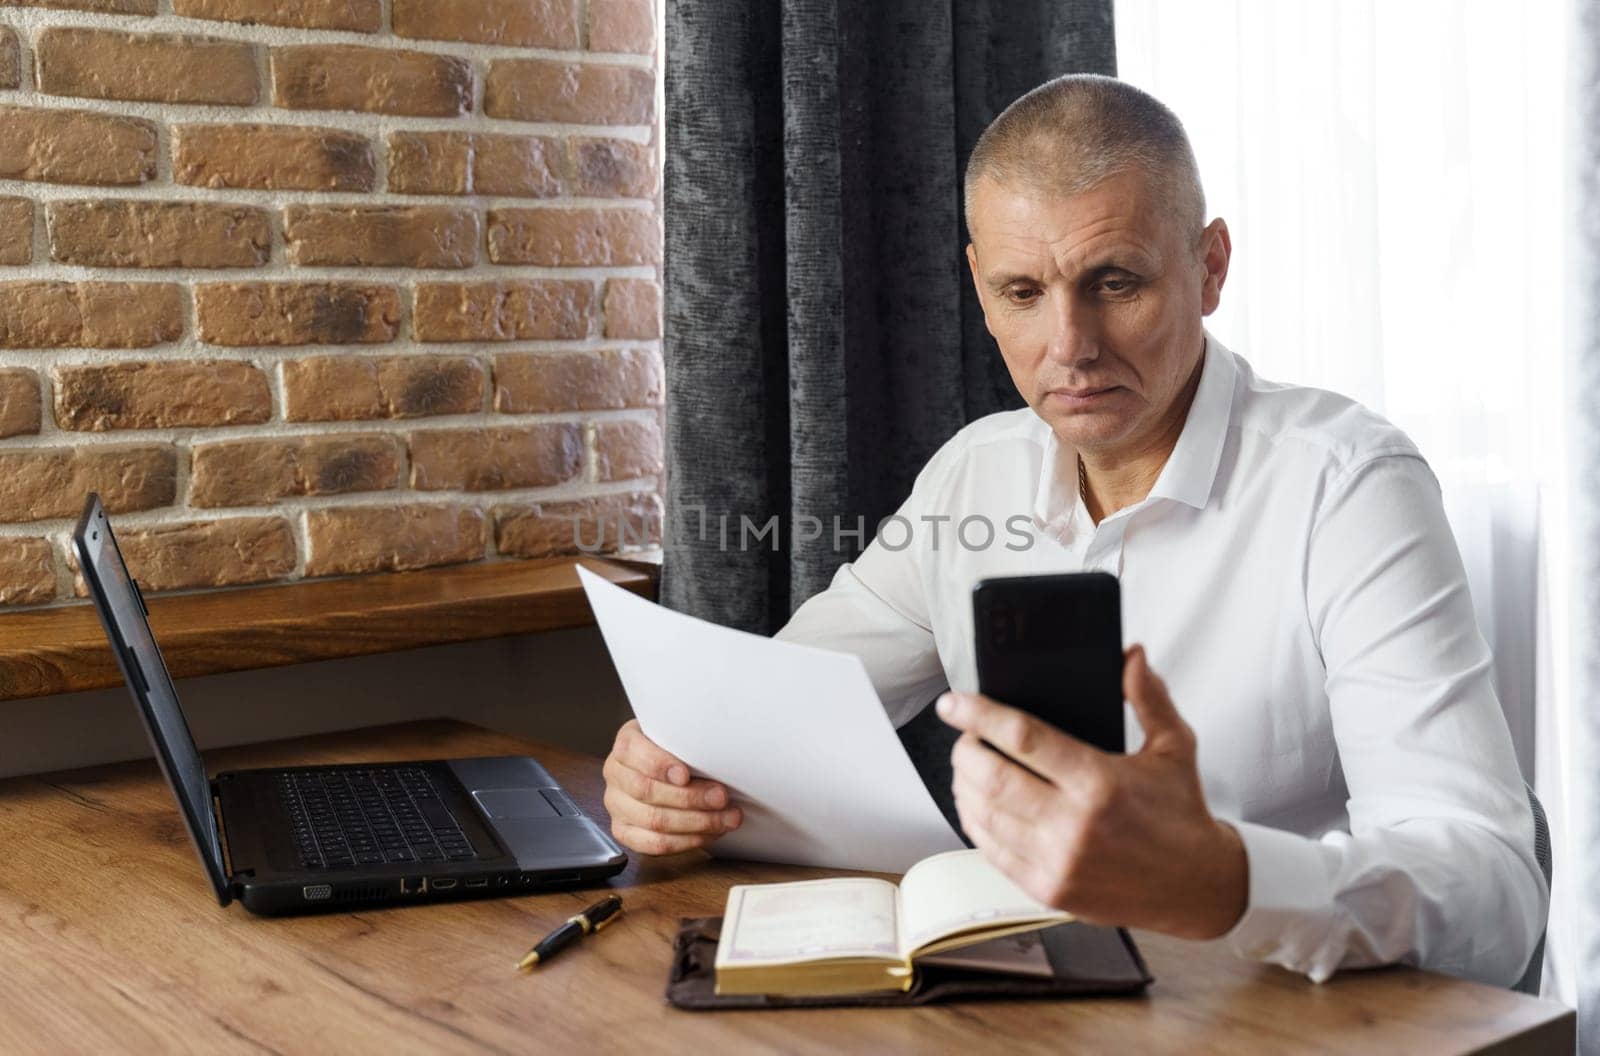 A businessman holds a phone and documents in his hands, reads information from the phone. by Sd28DimoN_1976